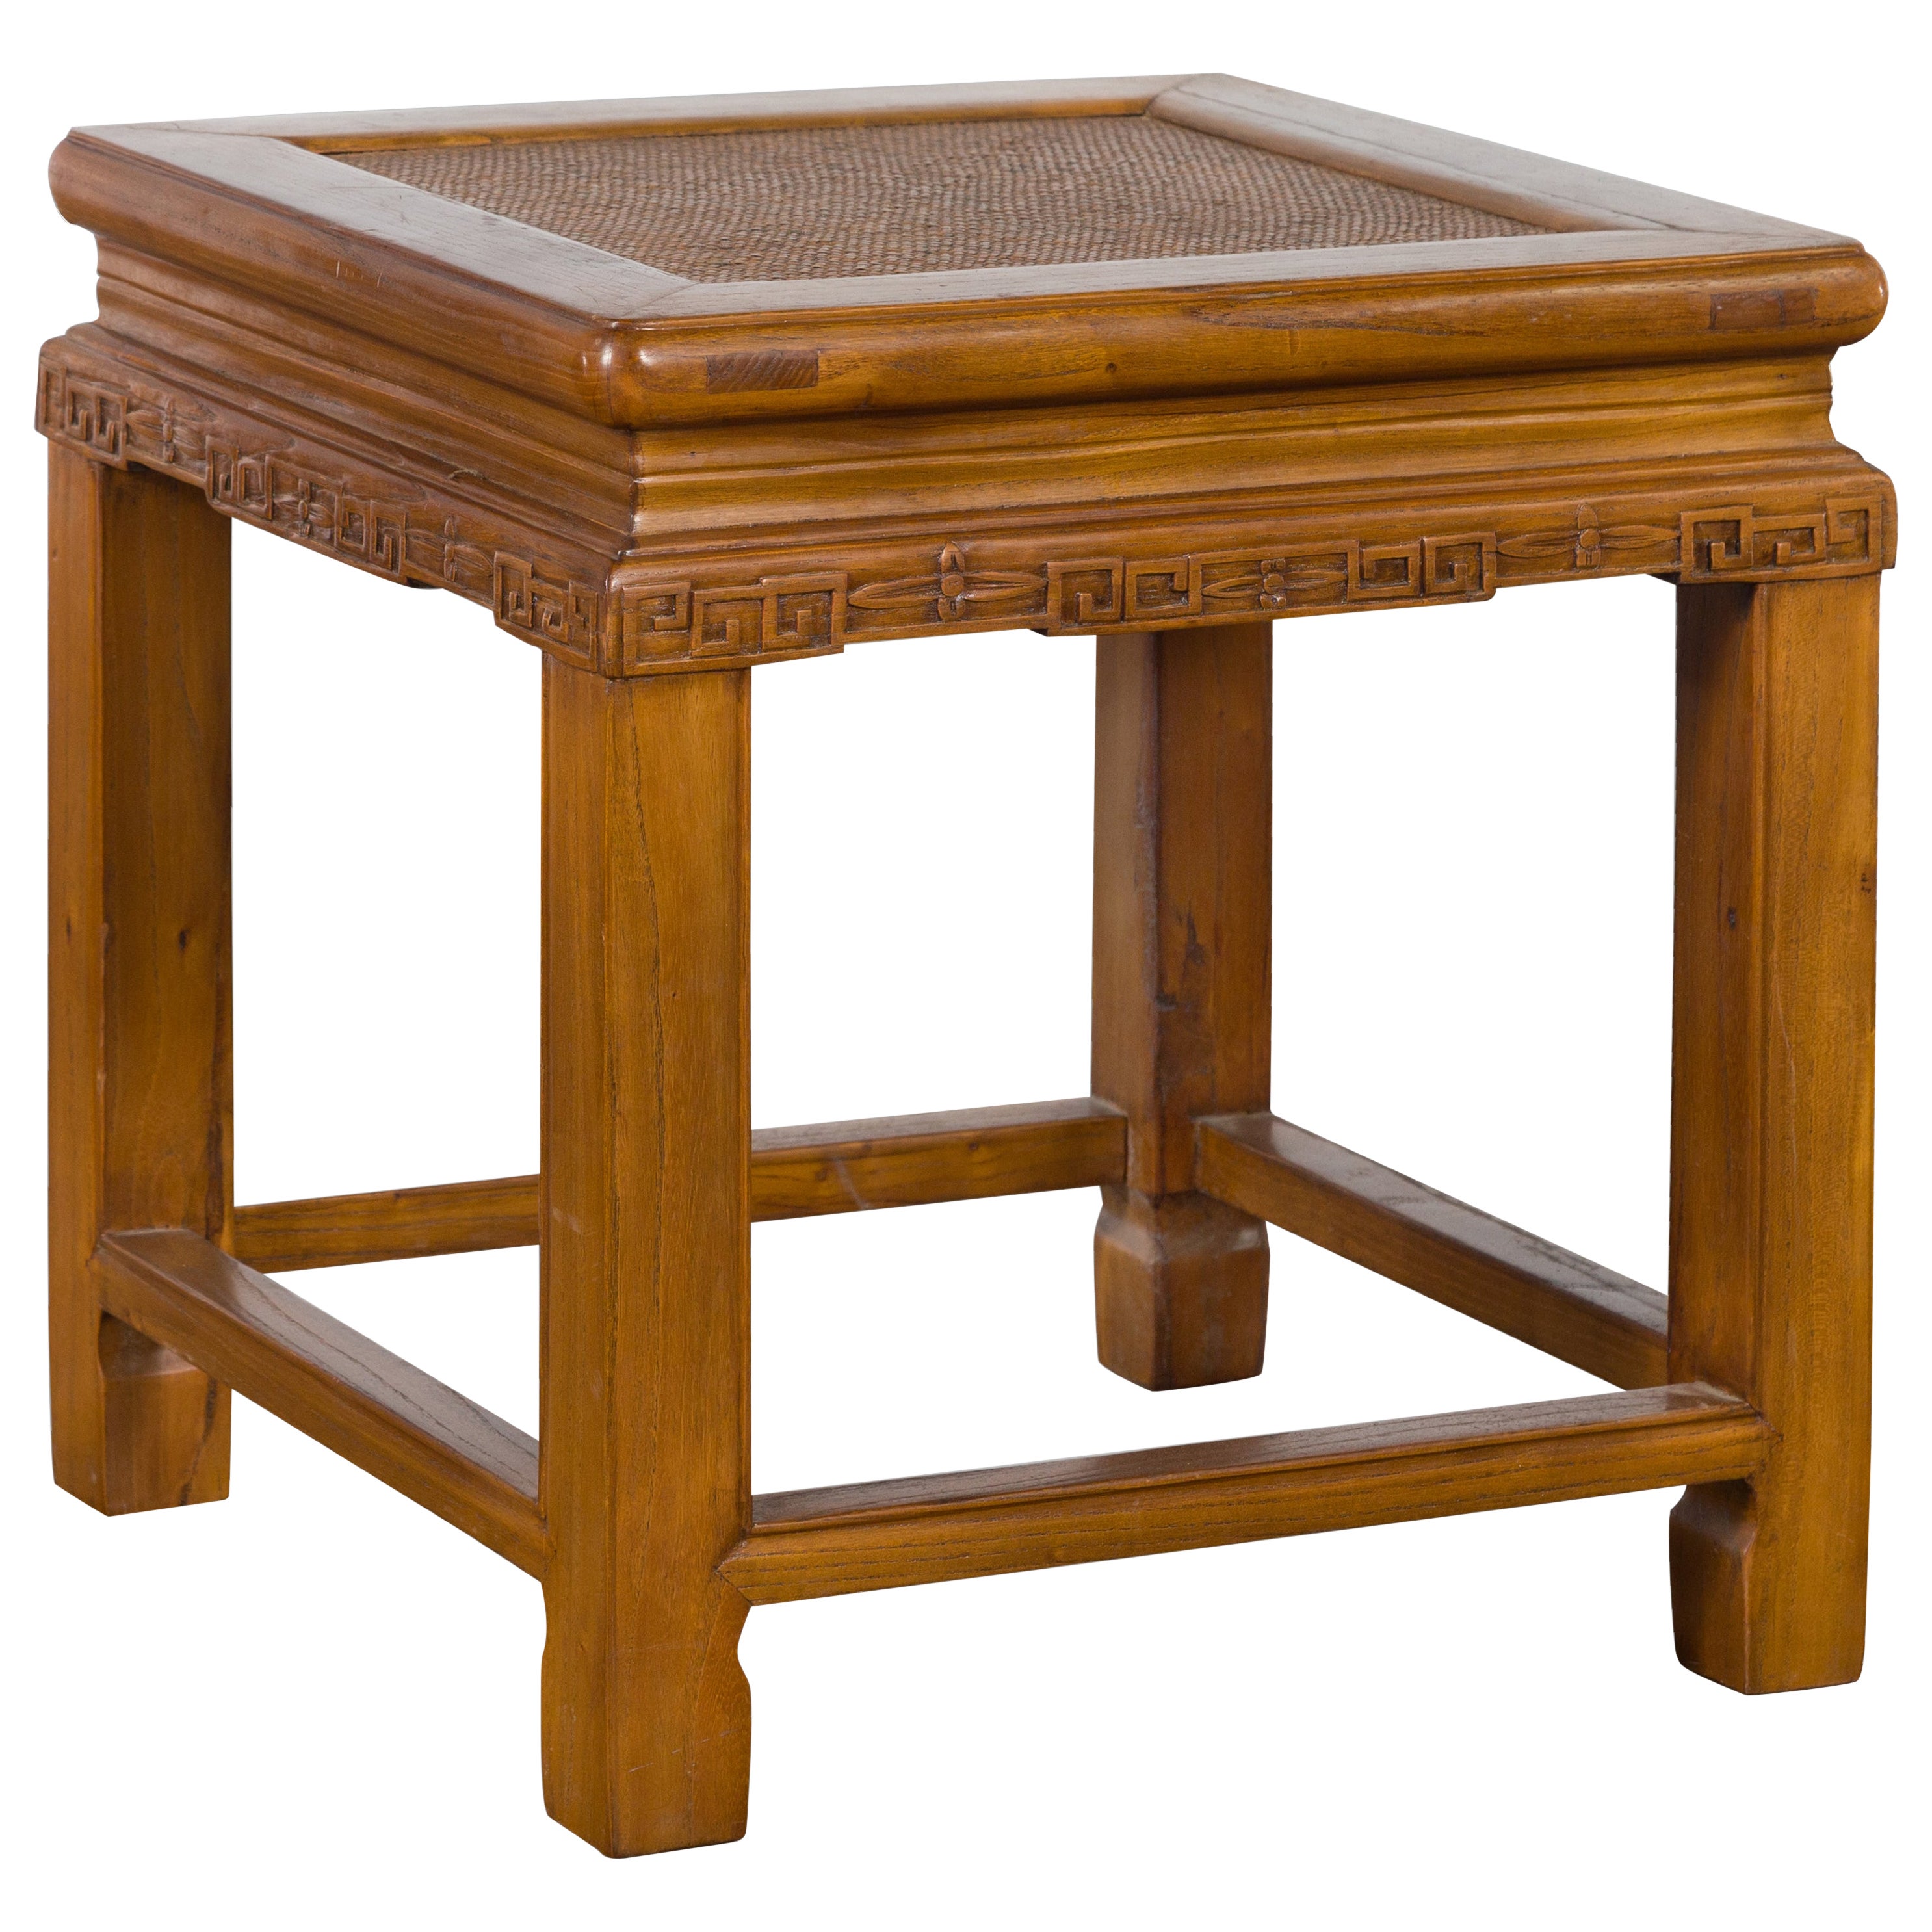 Chinese Early 20th Century Side Table with Carved Apron and Woven Rattan Top